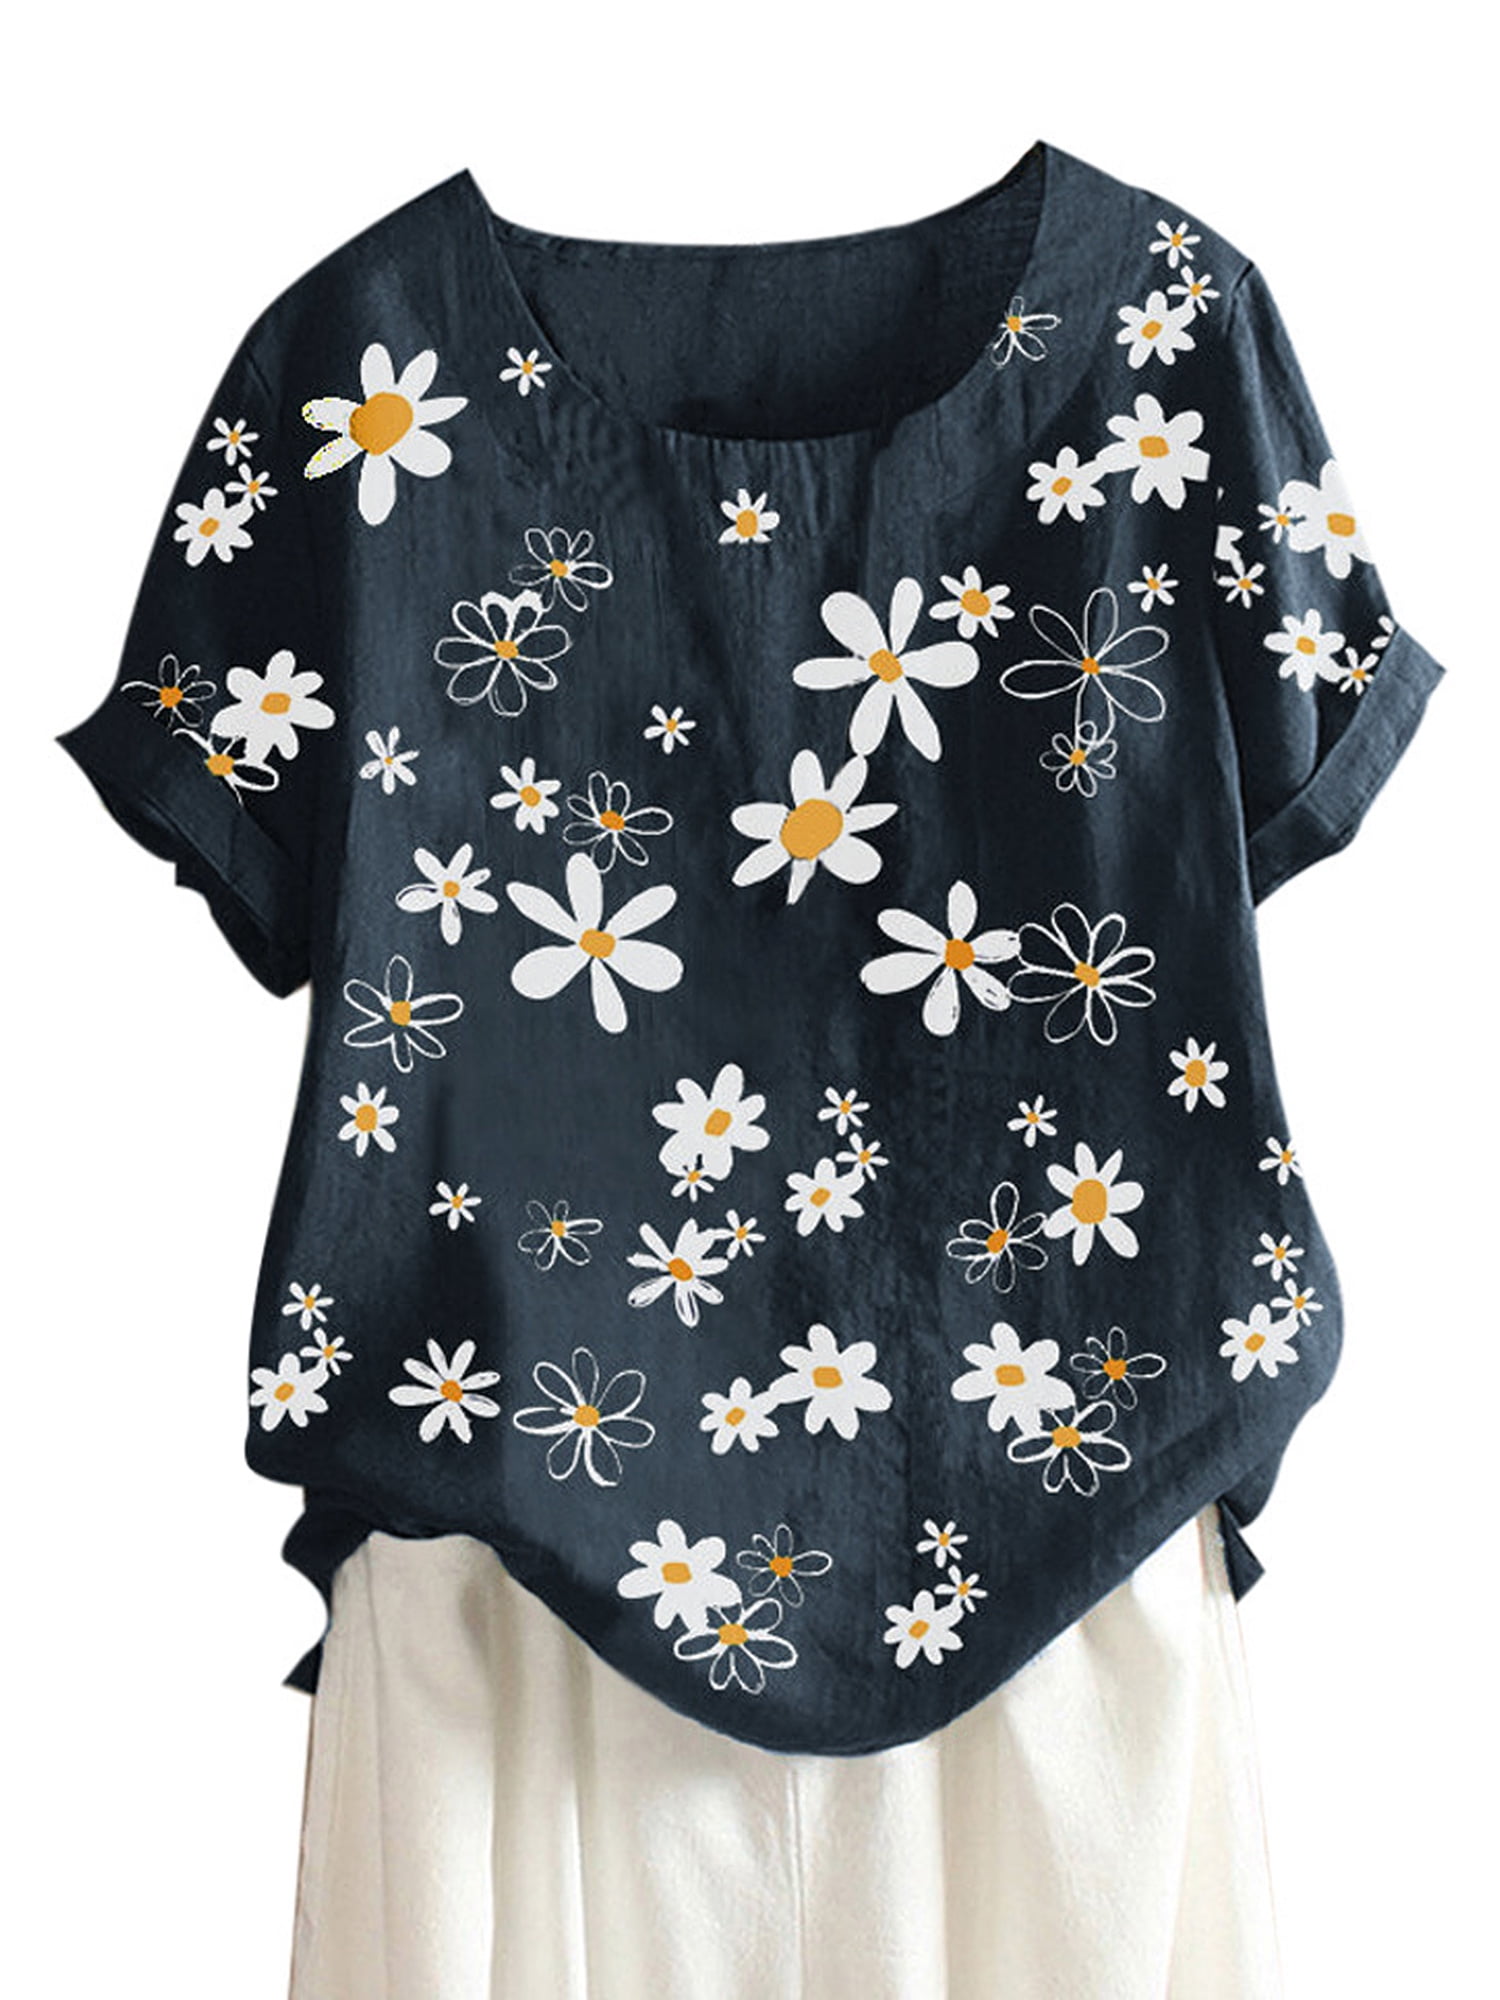 LEXUPA Womens Loose Collar T-Shirt Plus Size Short Sleeve Floral Printed Sunflower O-Neck Tops Blouse